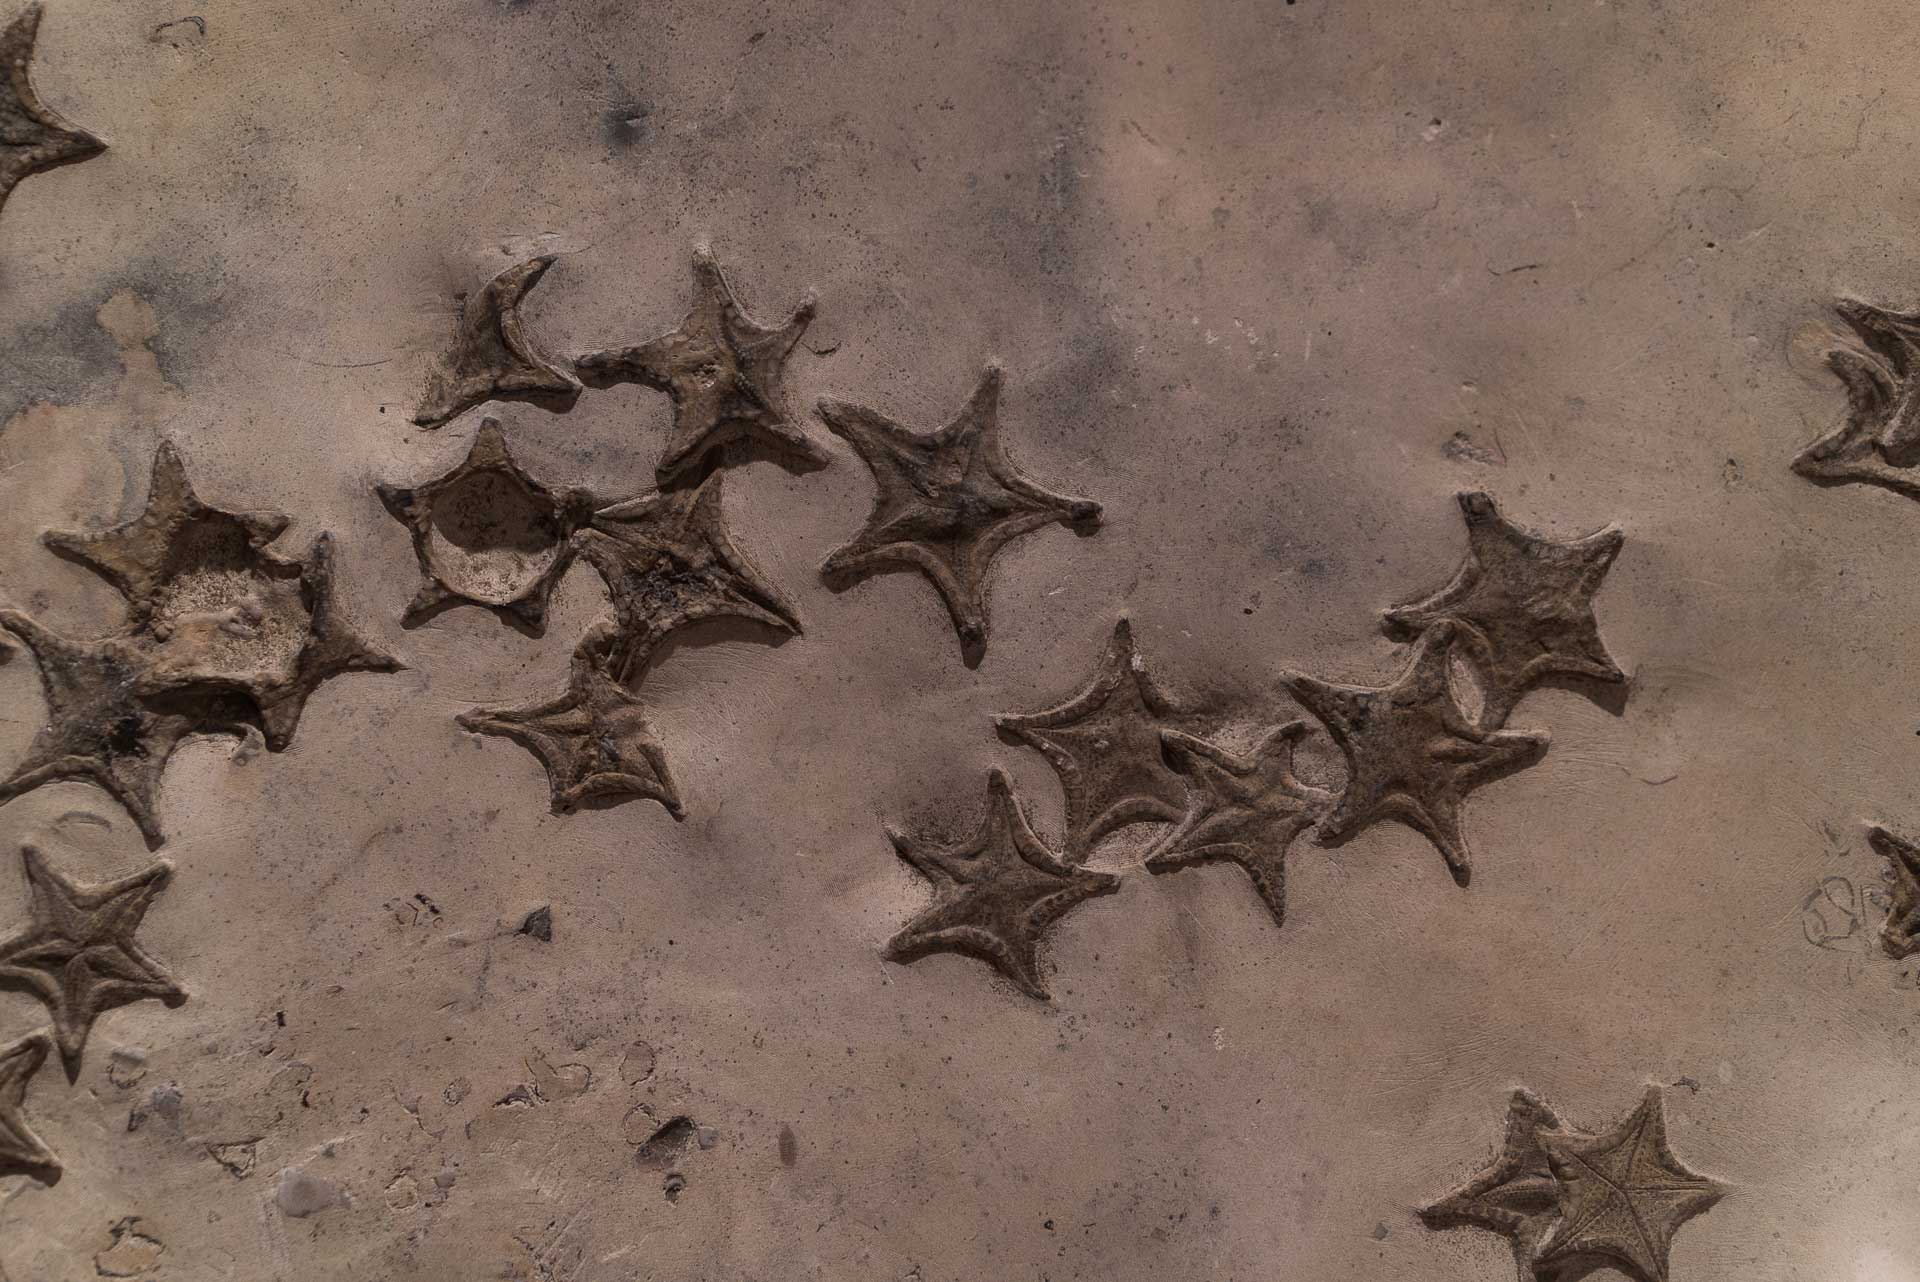 Photograph of fossil starfish on exhibit in the Texas Memorial Museum.